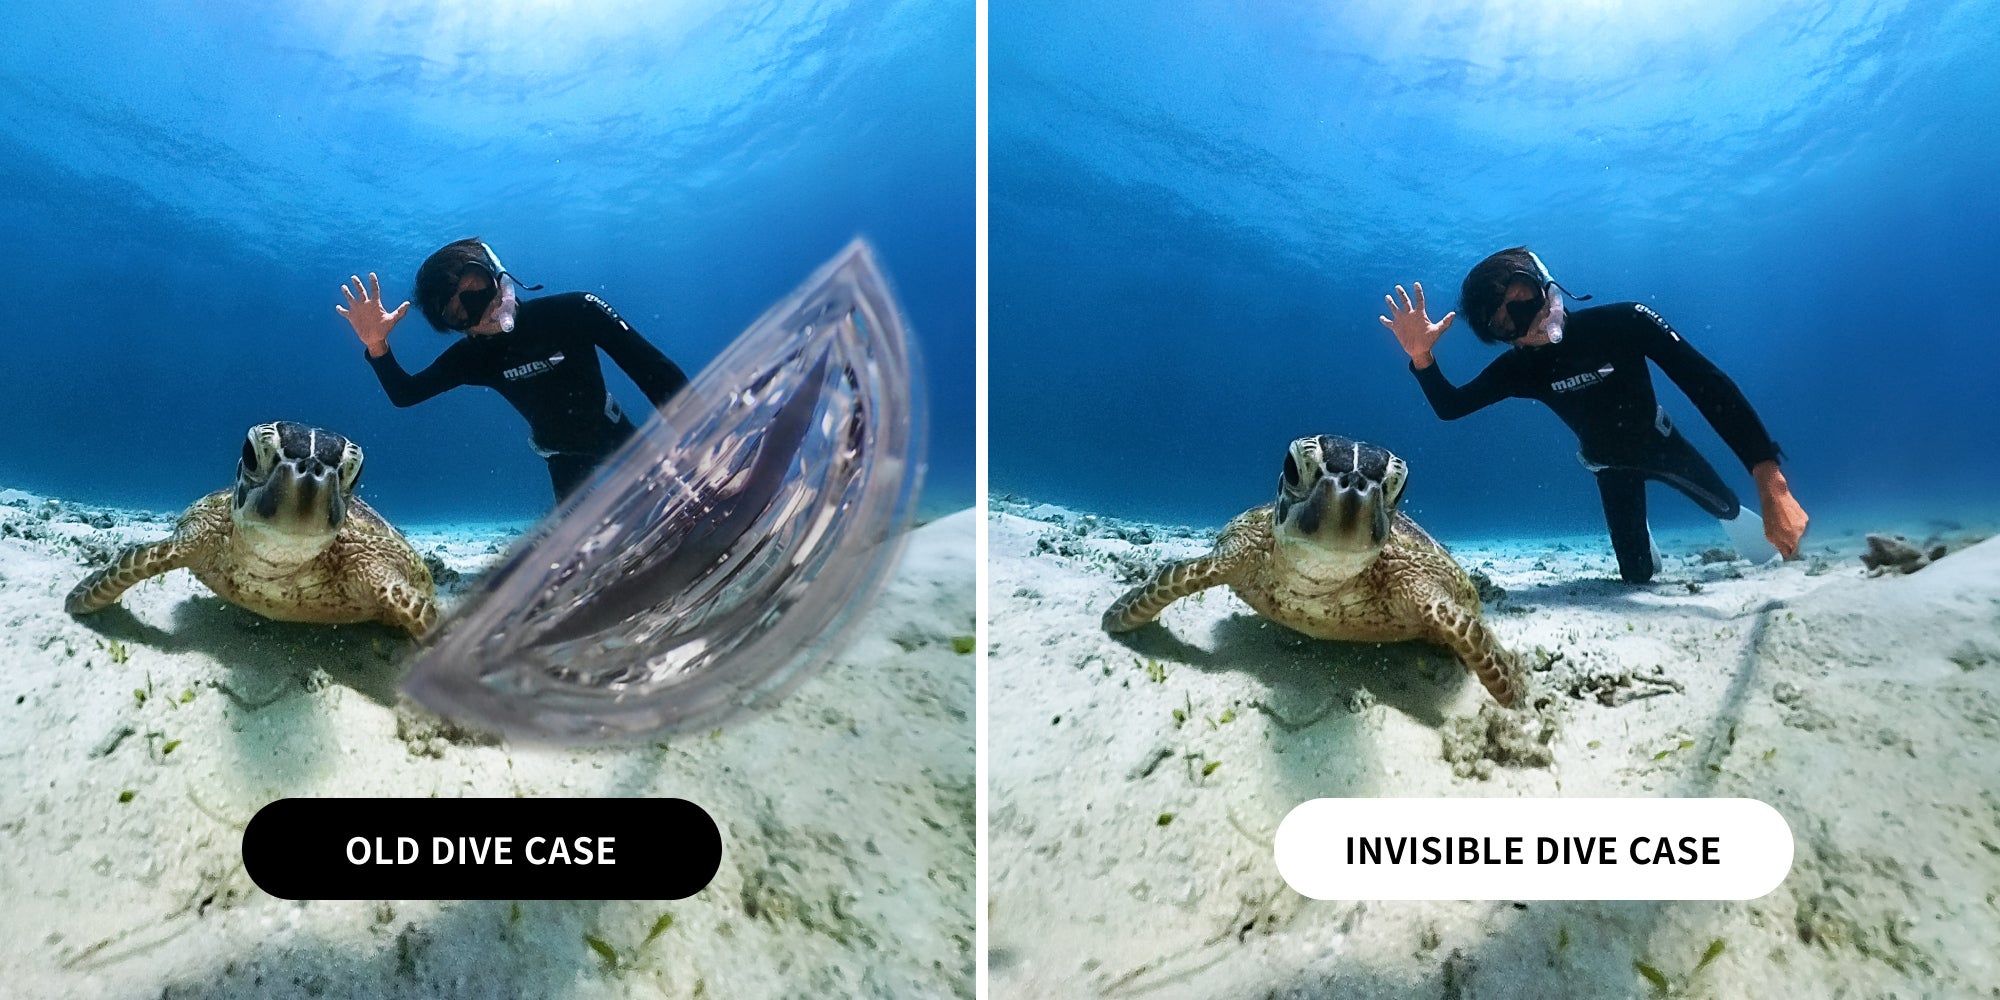 Two underwater photos of a snorkeler and turtle taken with the Insta360 X3, one with the dive case blocking the view.